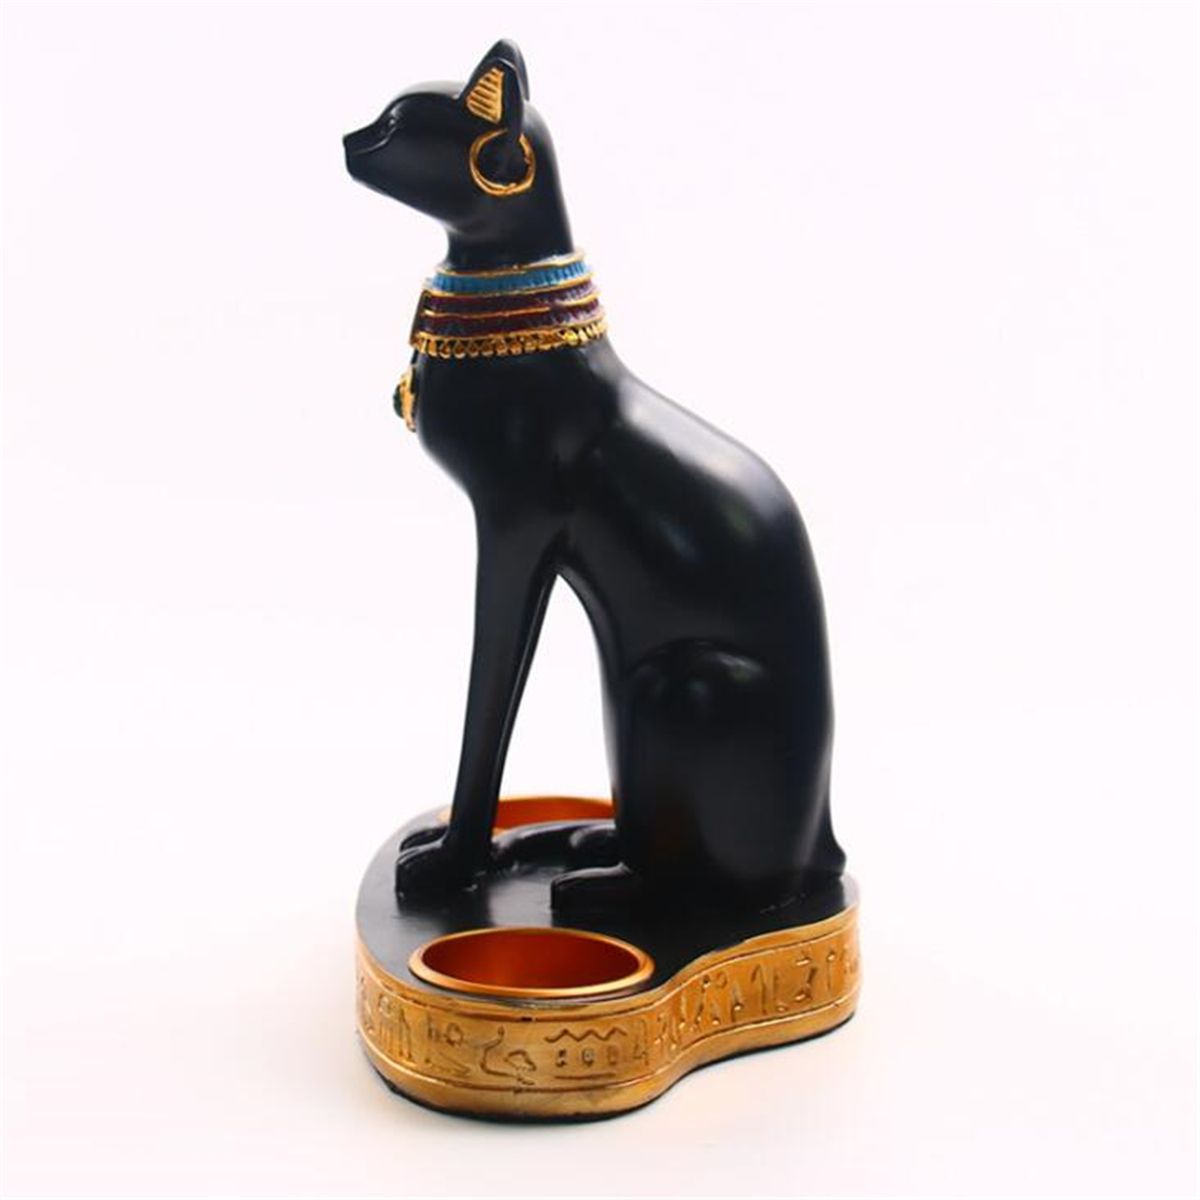 Ancient-Egypt-Bastet-Cat-Goddess-Statue-With-2-Tea-Light-Candle-Holders-Home-Room-Decorations-1520778